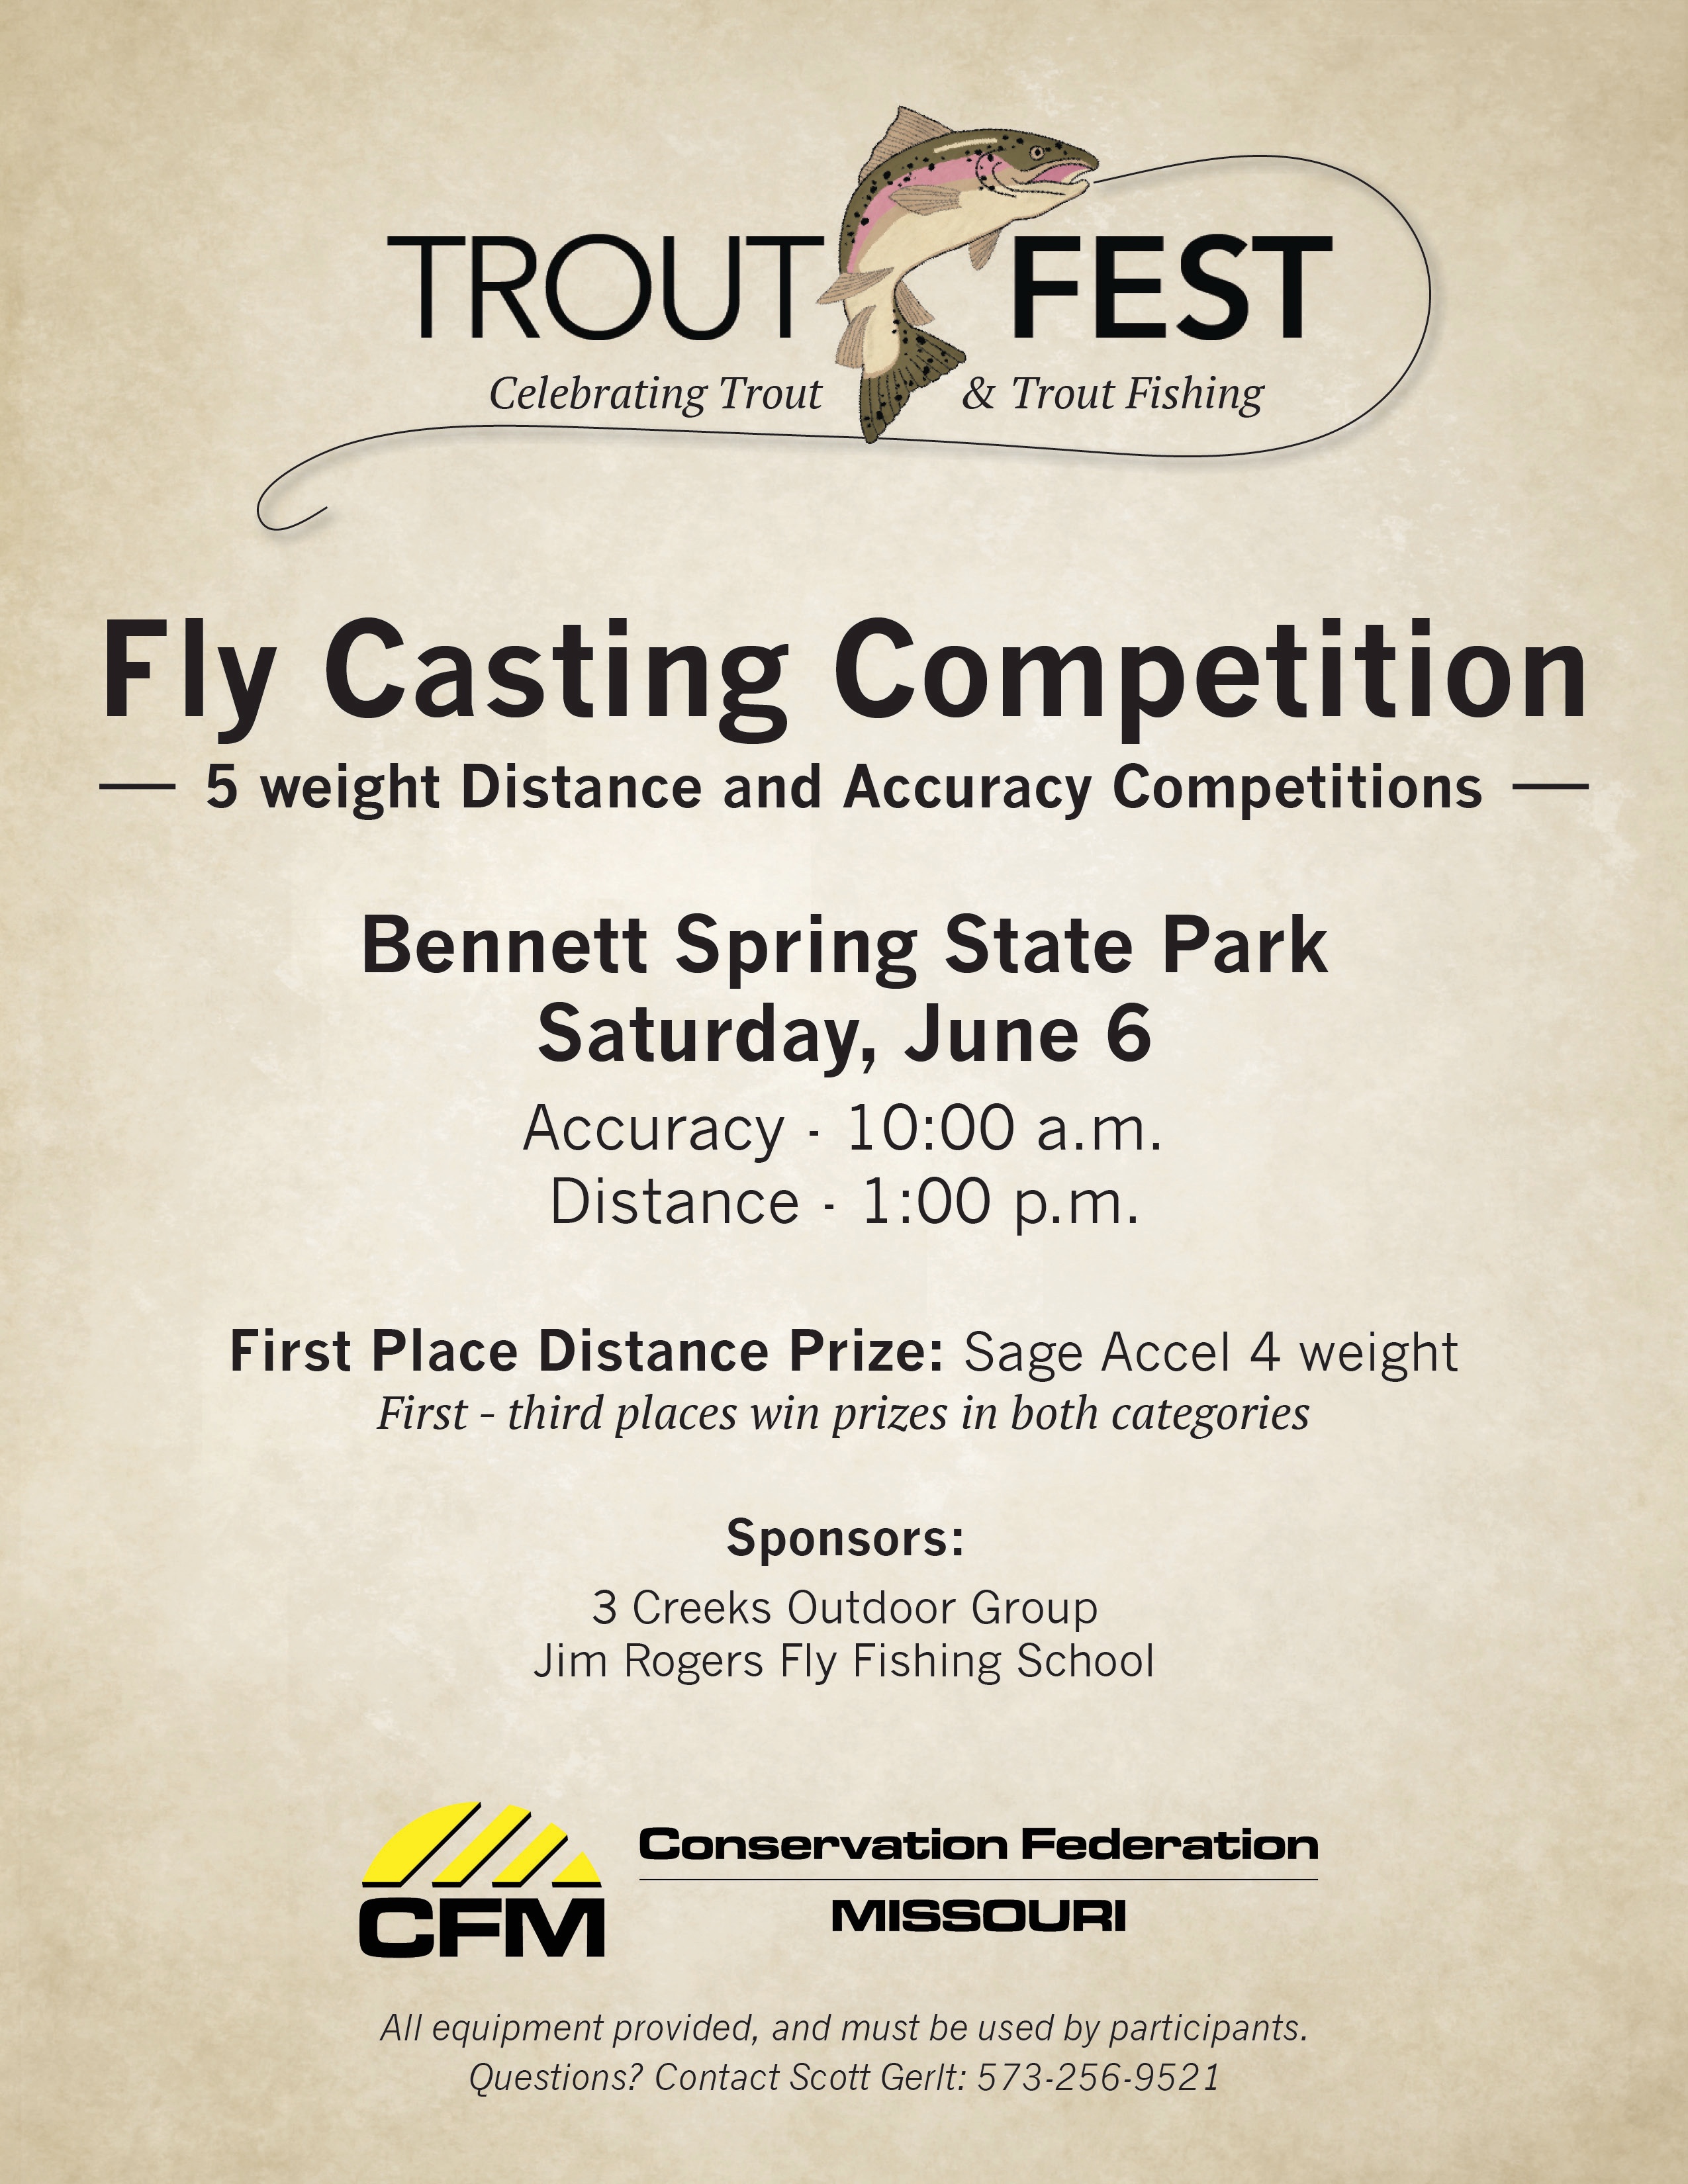 Trout Fest Fly Casting Flyer